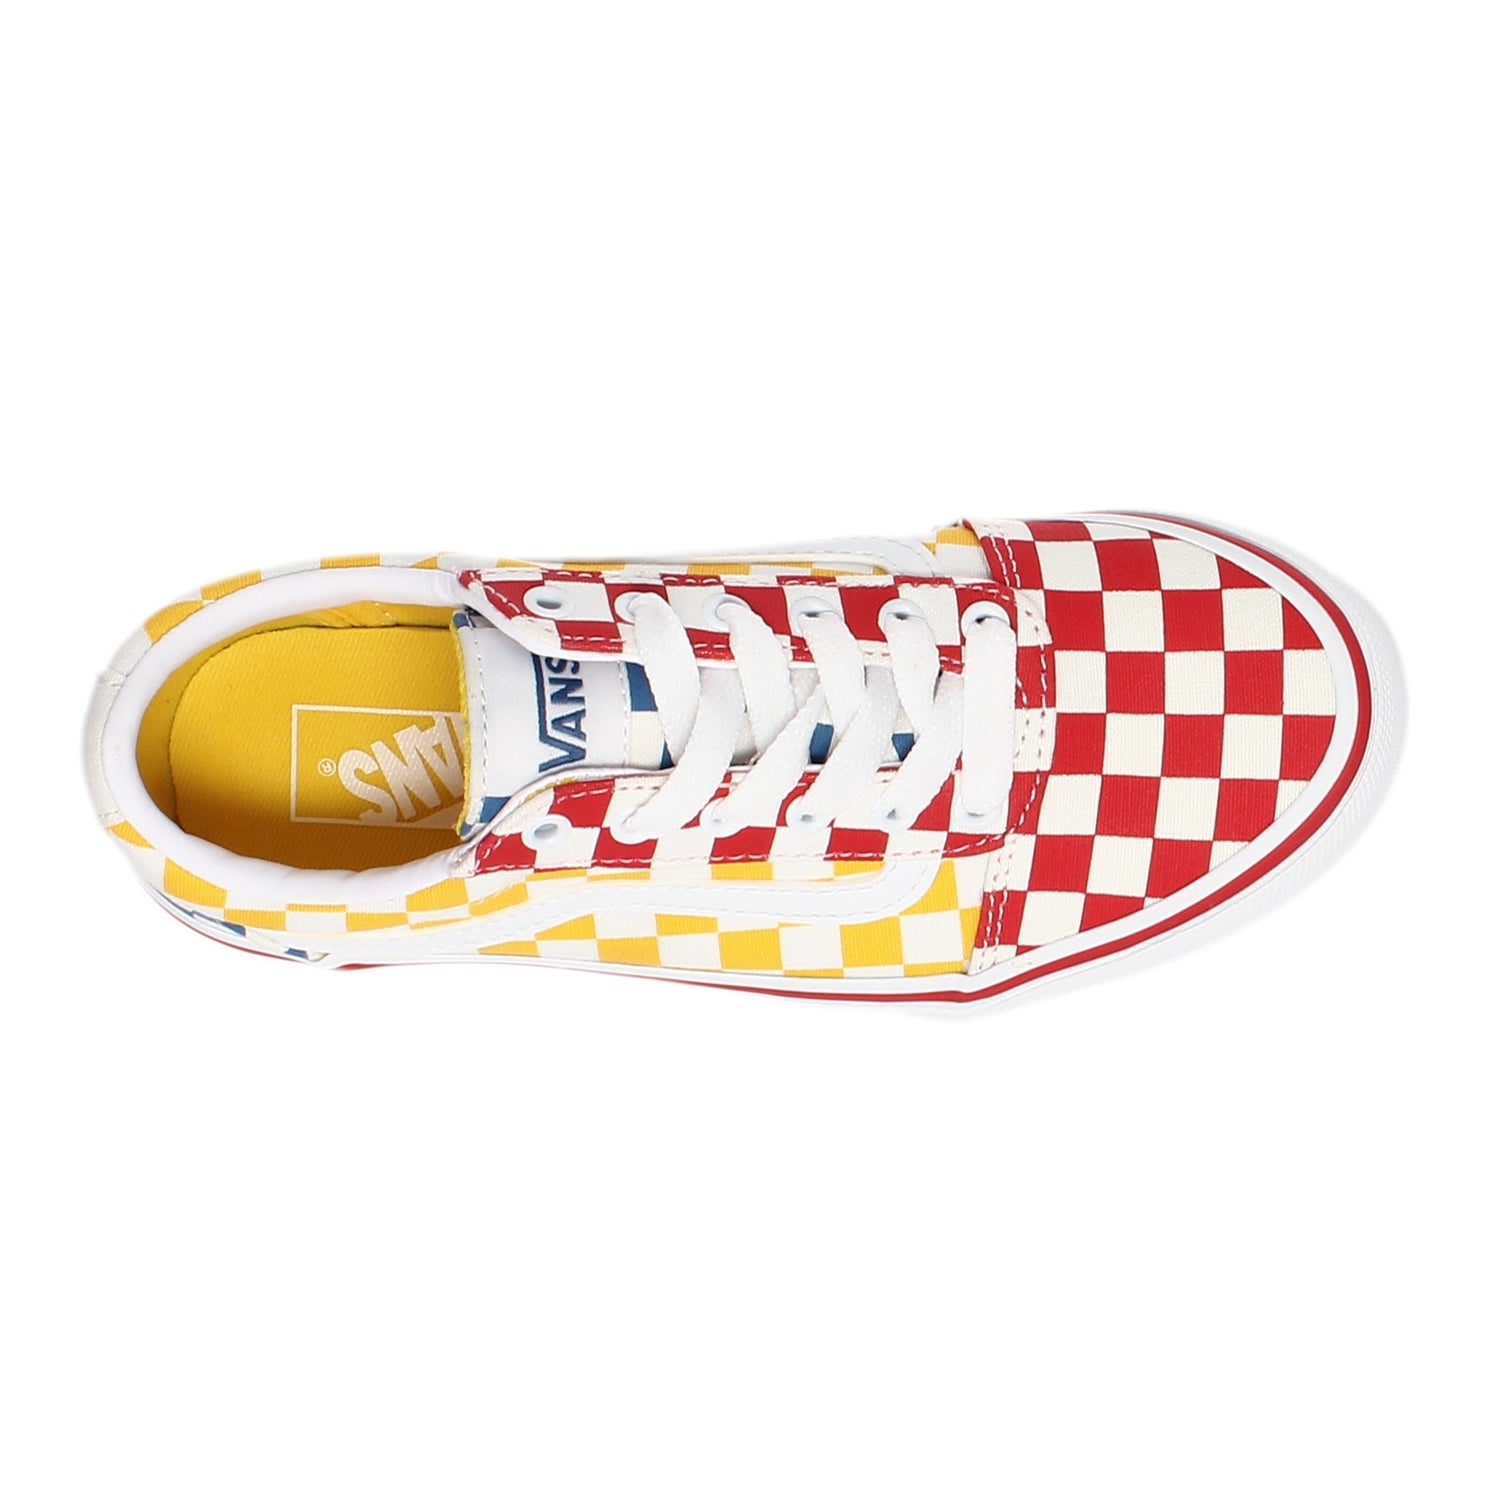 Vans Shoes Youth Kids 7 Womens 8.5 Checkerboard Slip On Skater Sneakers  Yellow